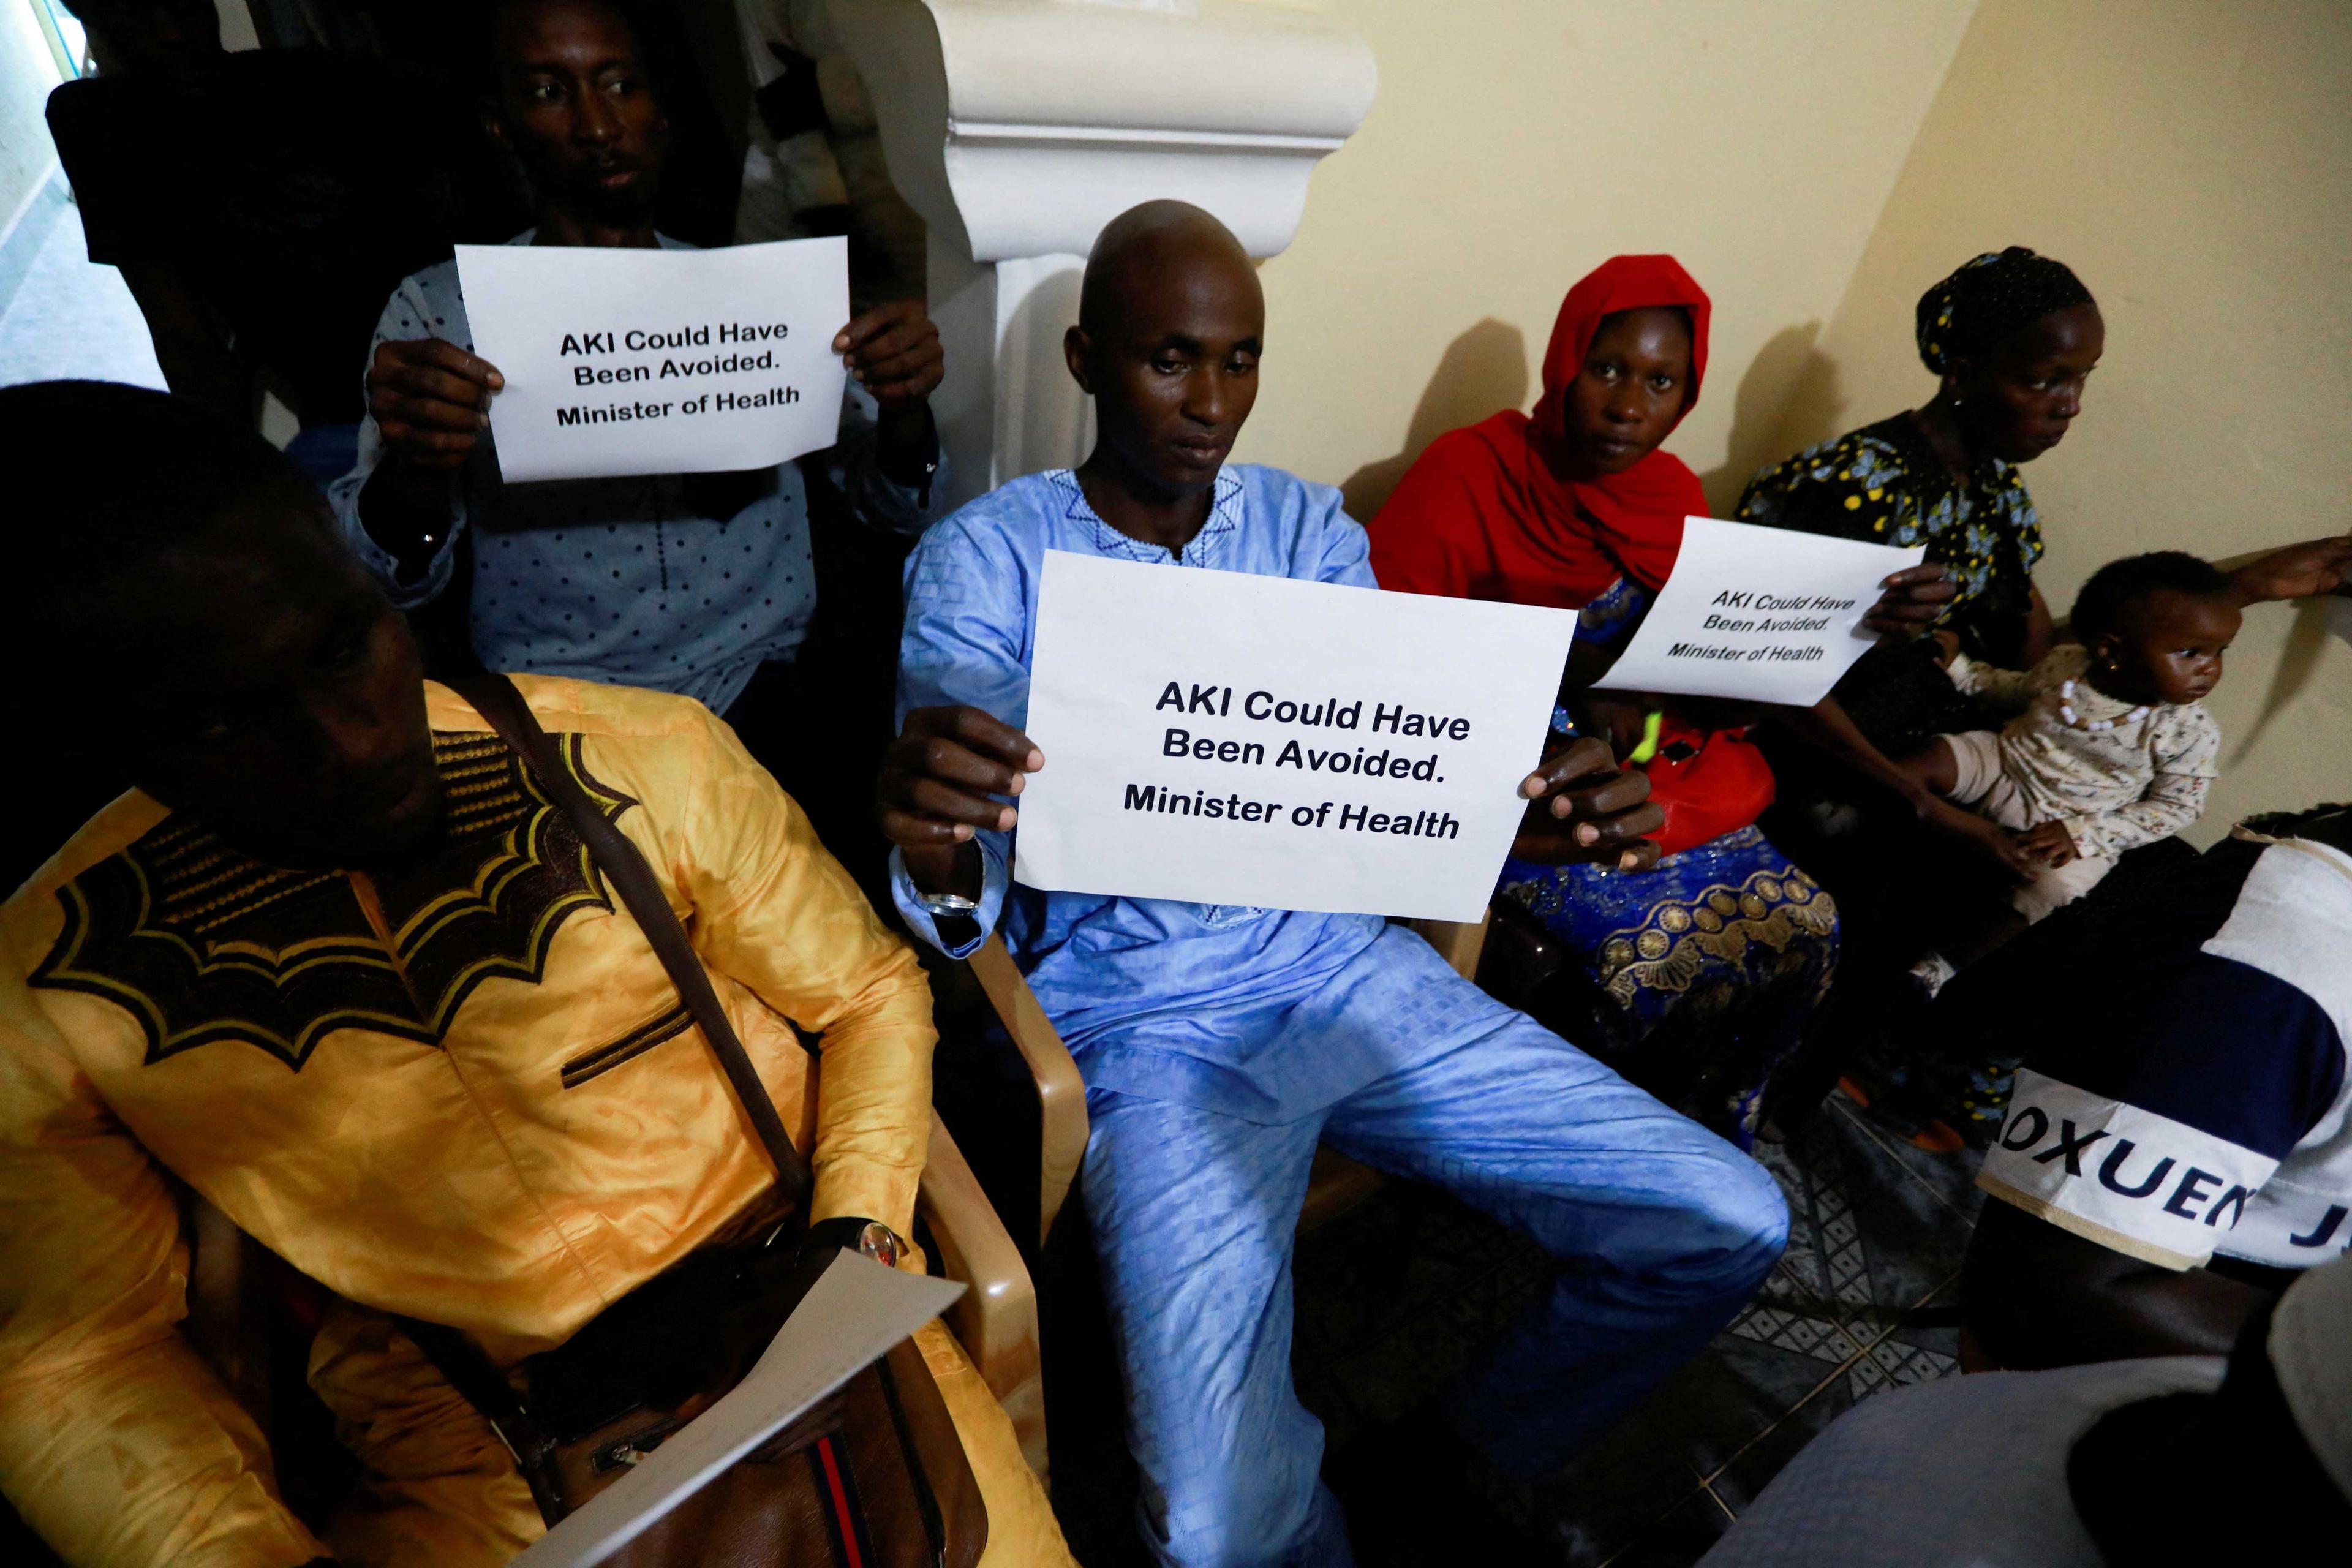 A man holds up a sign during a news conference, calling for justice for the deaths of children linked to contaminated cough syrups, in Serekunda, Gambia, Nov 4, 2022. Photo: Reuters